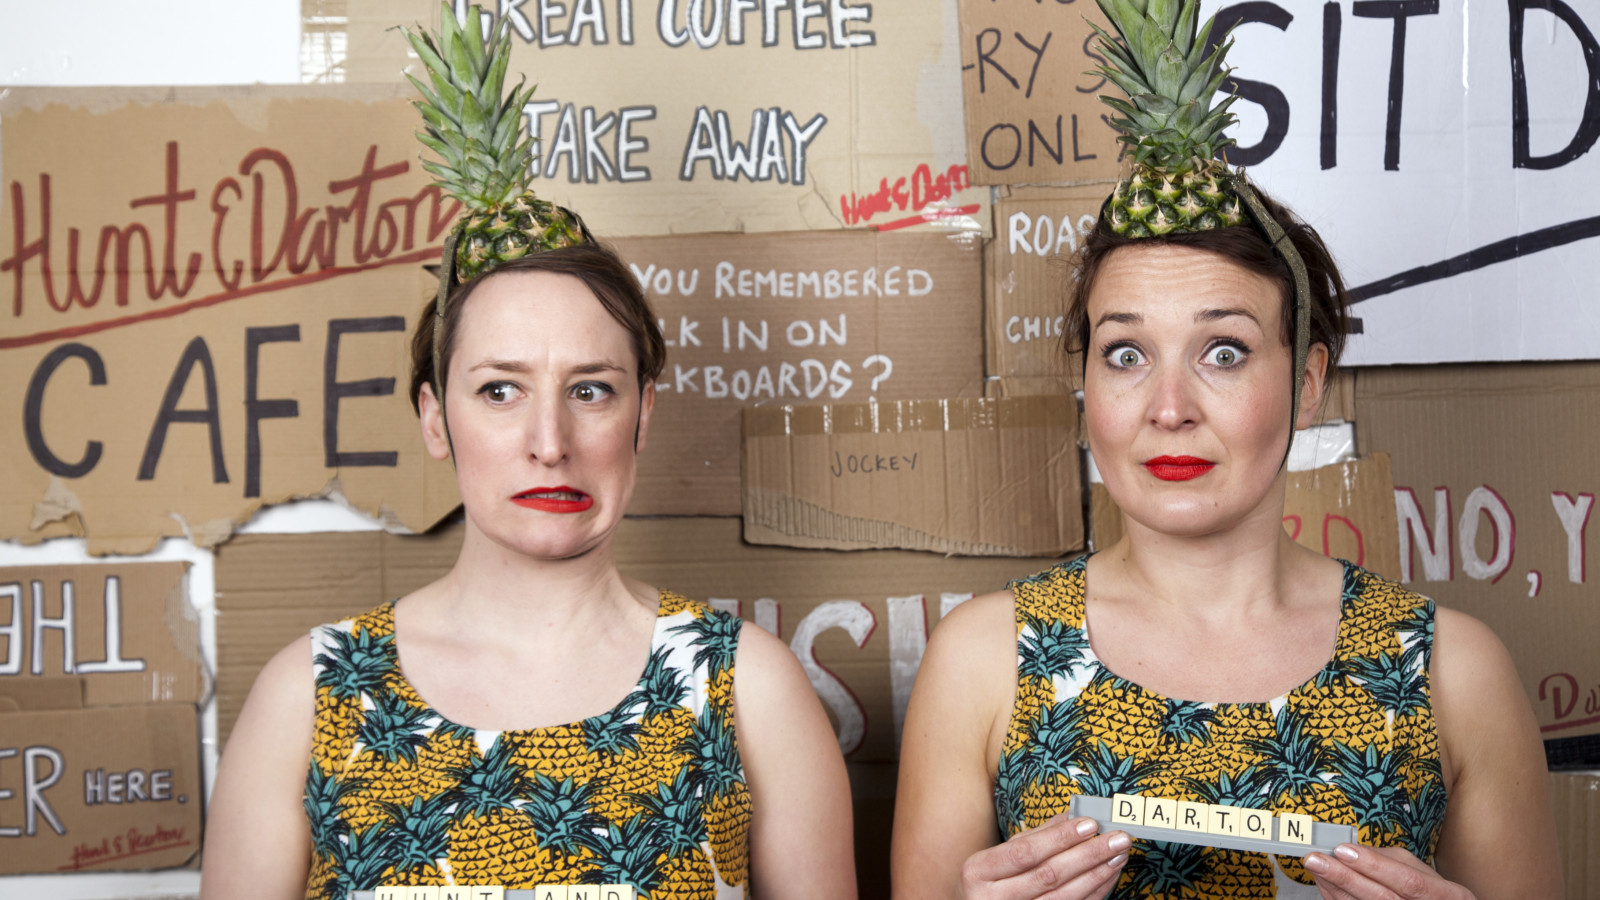 Artists Jenny Hunt and Holly Darton wear pineapple patterned clothes and pineapple tops on their heads. Their faces are surprised. They hold scrabble pieces which say 'Hunt and Darton' and are standing against a backdrop of many cardboard signs.